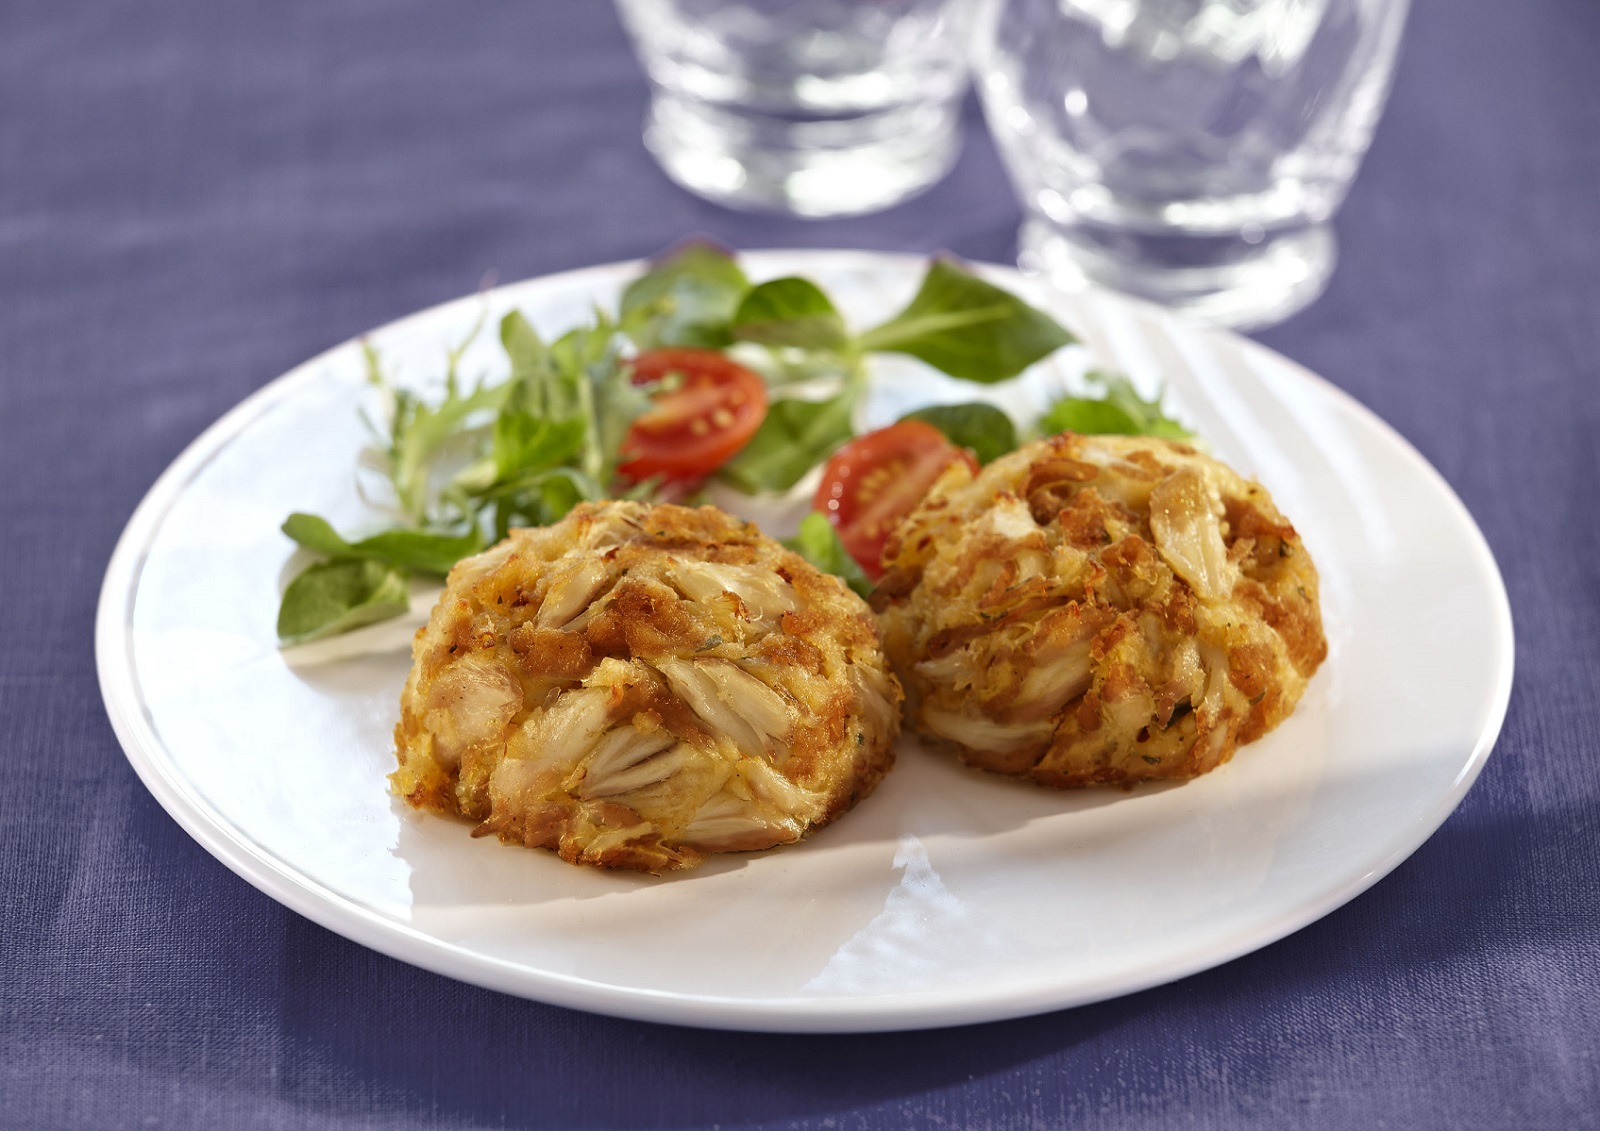 Jumbo Lump Crab Cakes Recipe from Shirley Phillips of Phillips Seafood